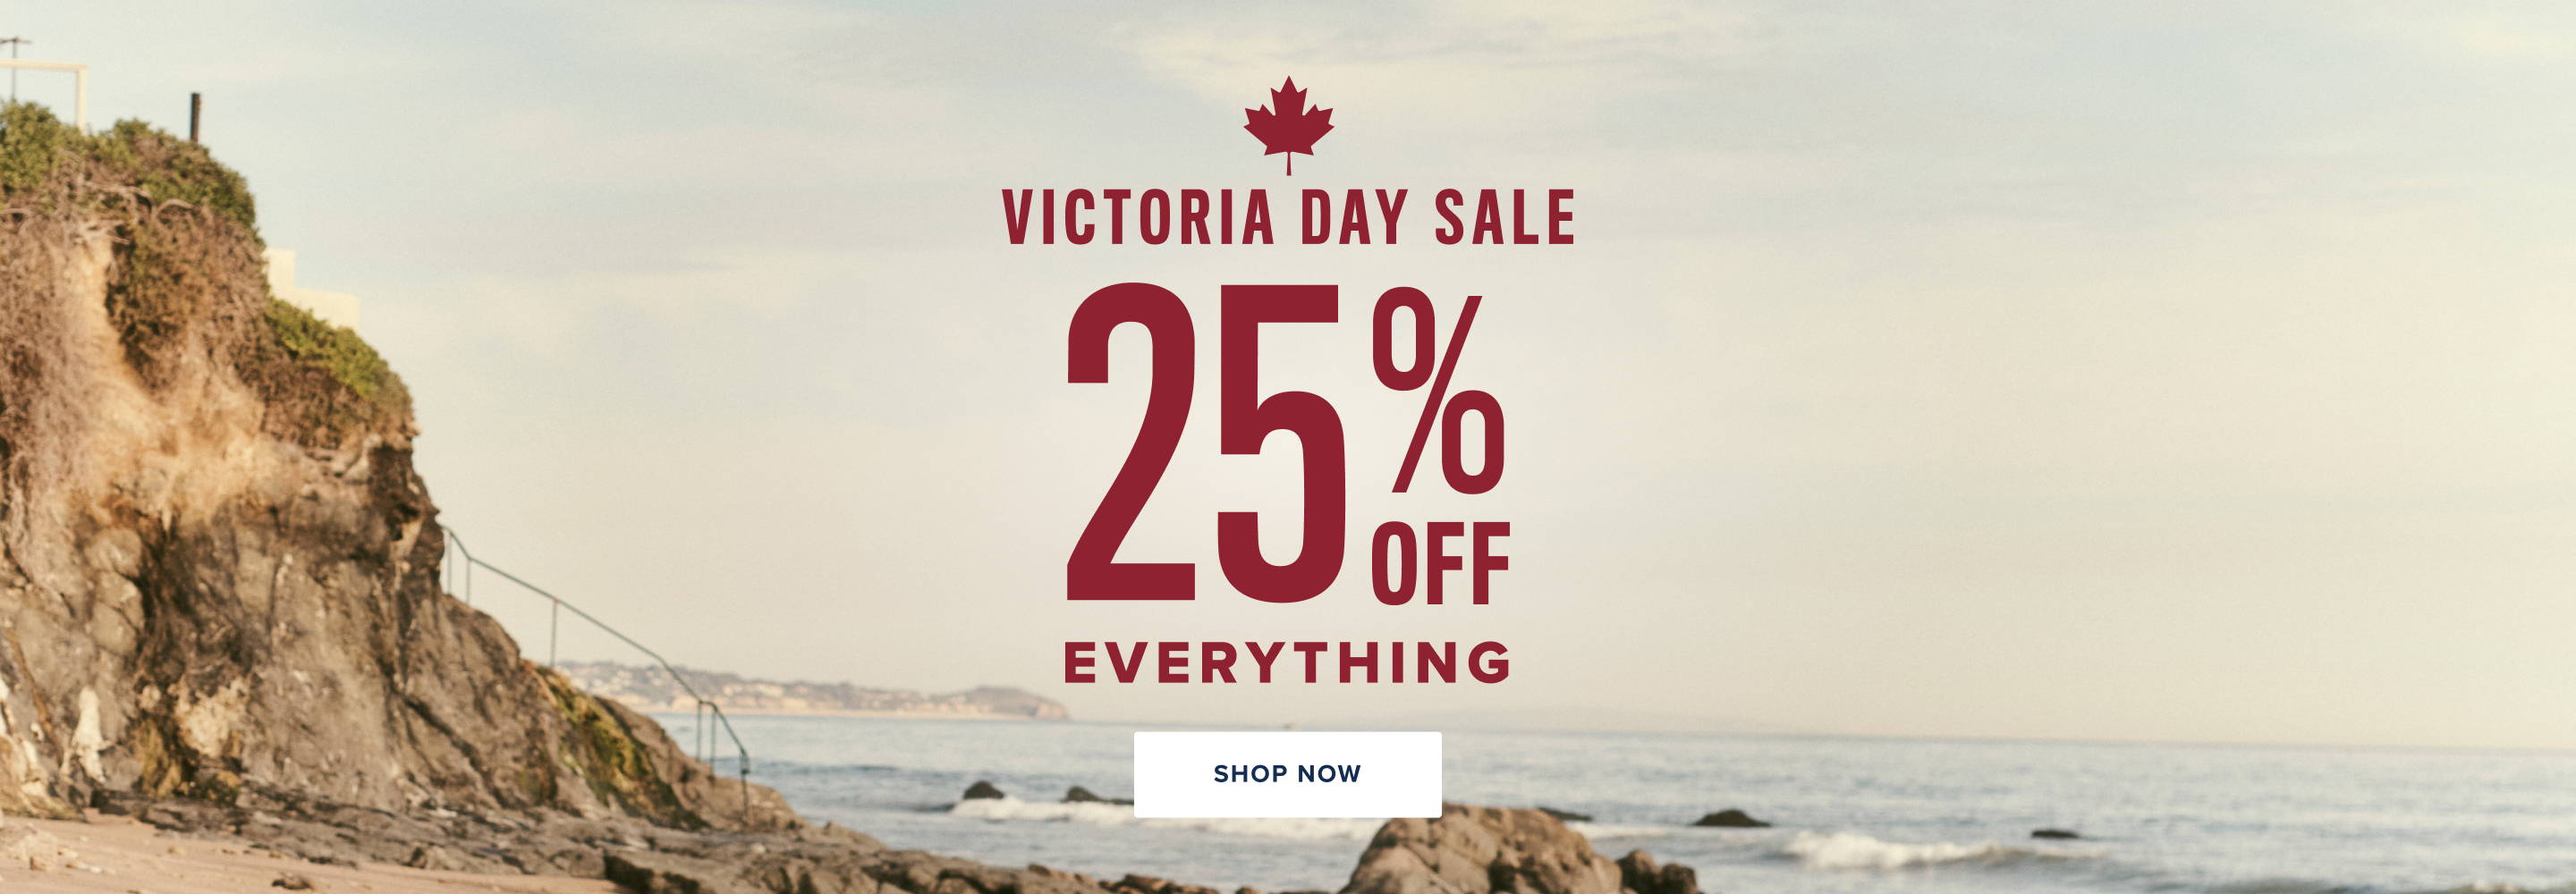 Victoria Day Sale 25% Off Everything. 